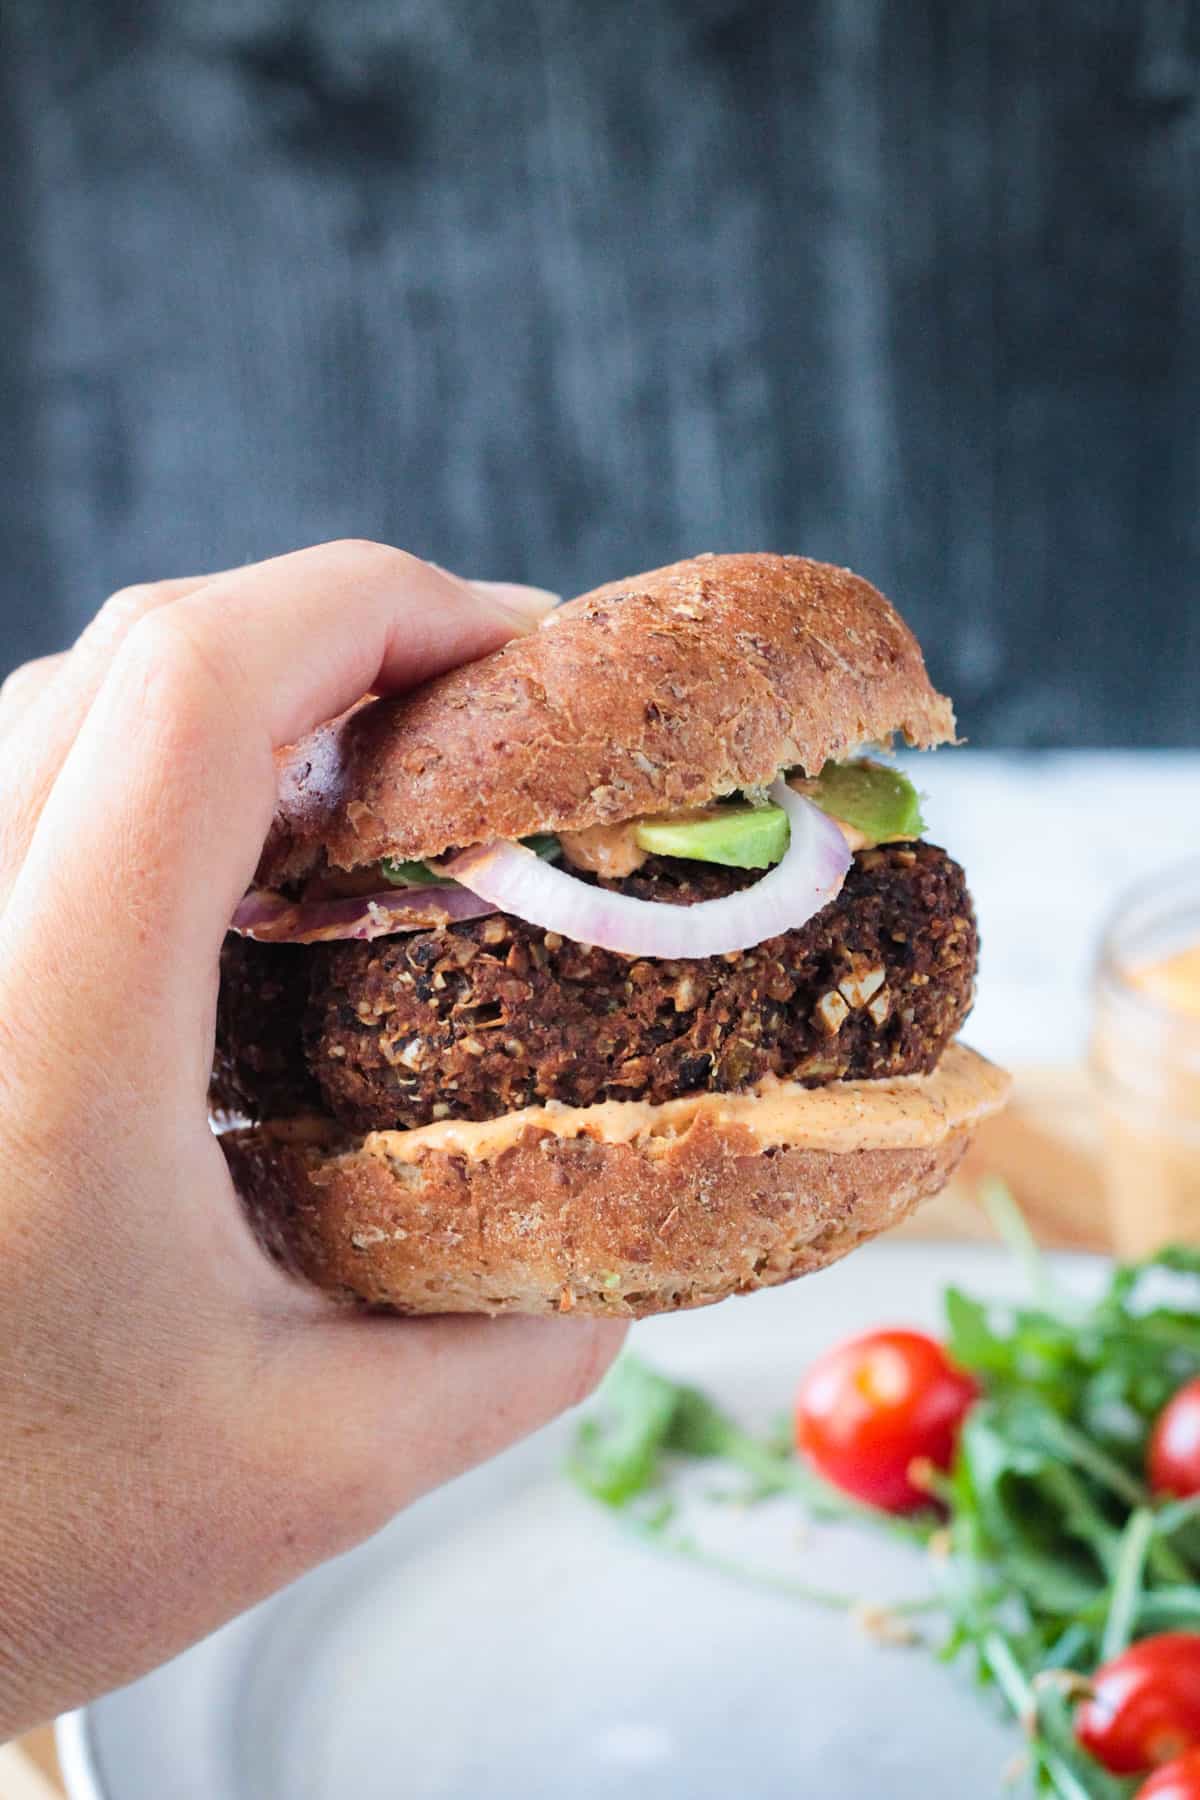 Hand holding a burger on a whole wheat bun with sauce, avocado and onion slices.